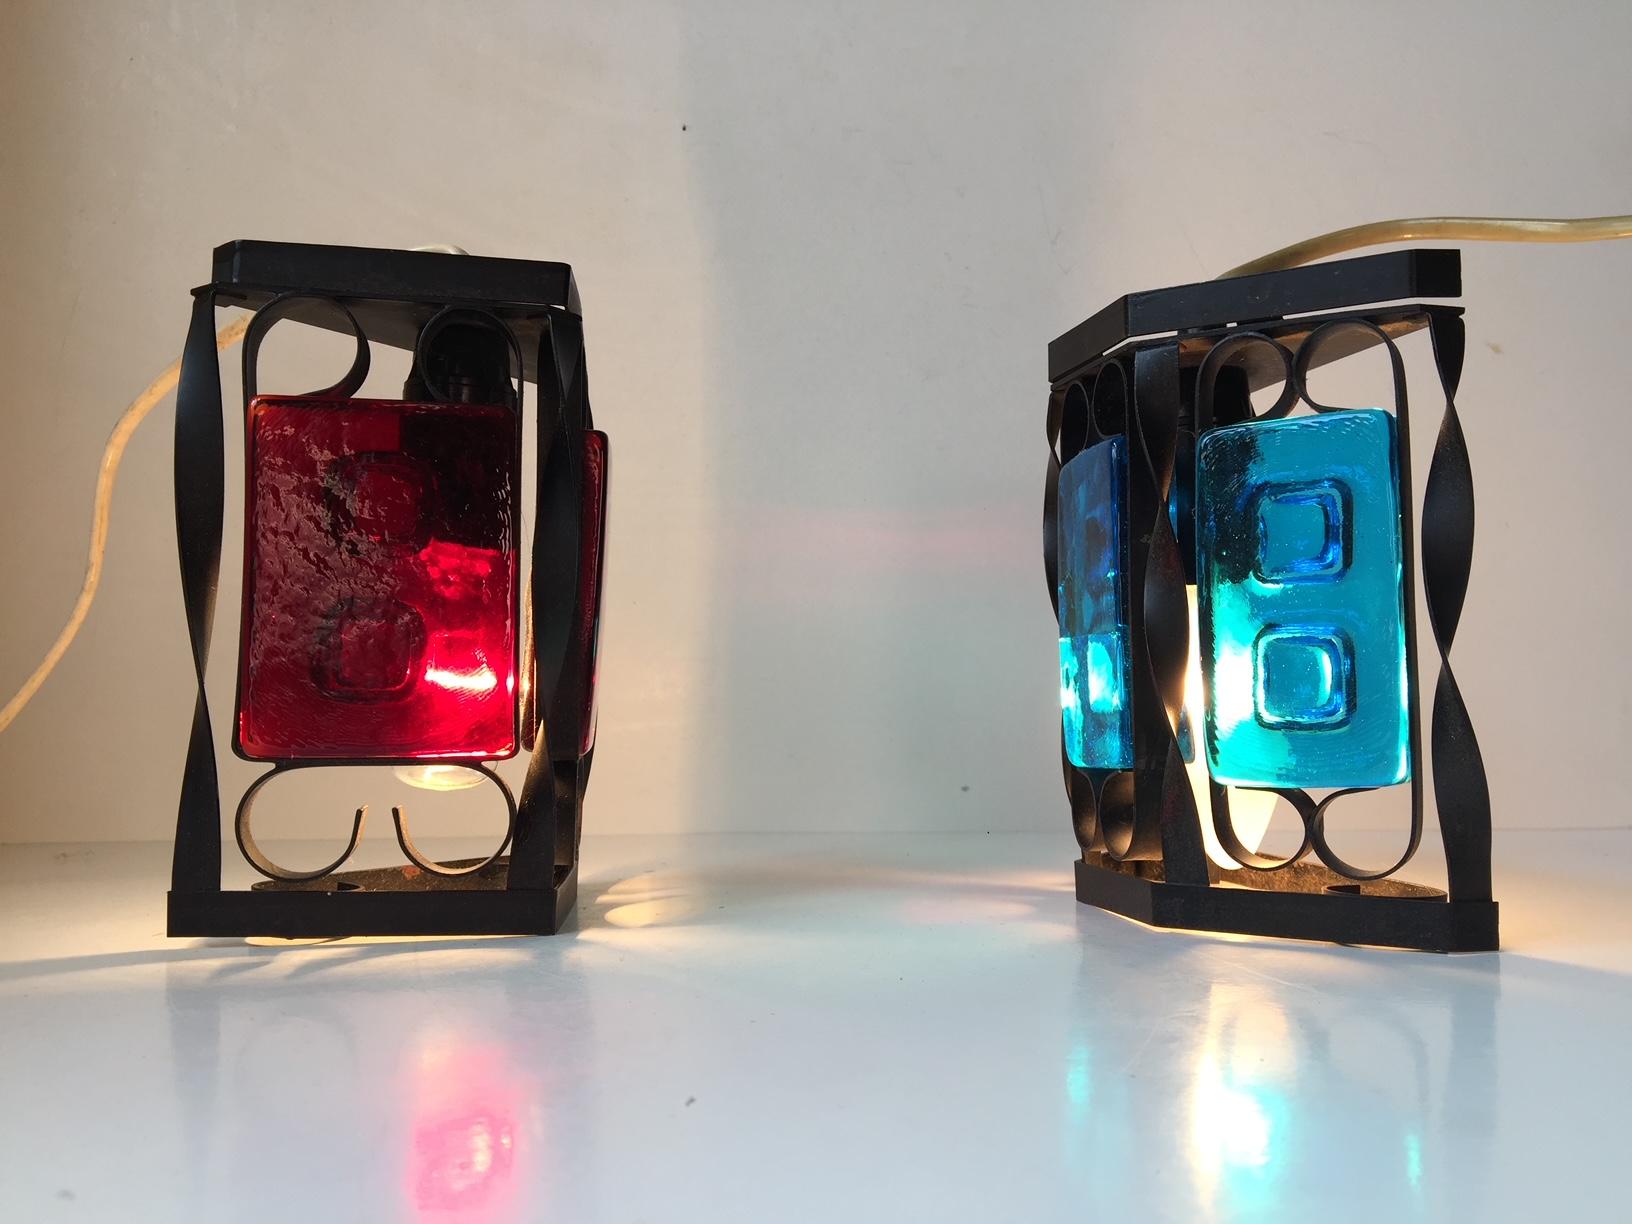 A set of Danish black iron and colored glass sconces. Manufactured and designed in the 1970s as a collaboration between Dantofte and Holmegaard. Measurements: H 16/14 cm (6.2/5.8 inch), W 12/13 (4.8/5.2 inch). Similar to designs by Claus Bolby and